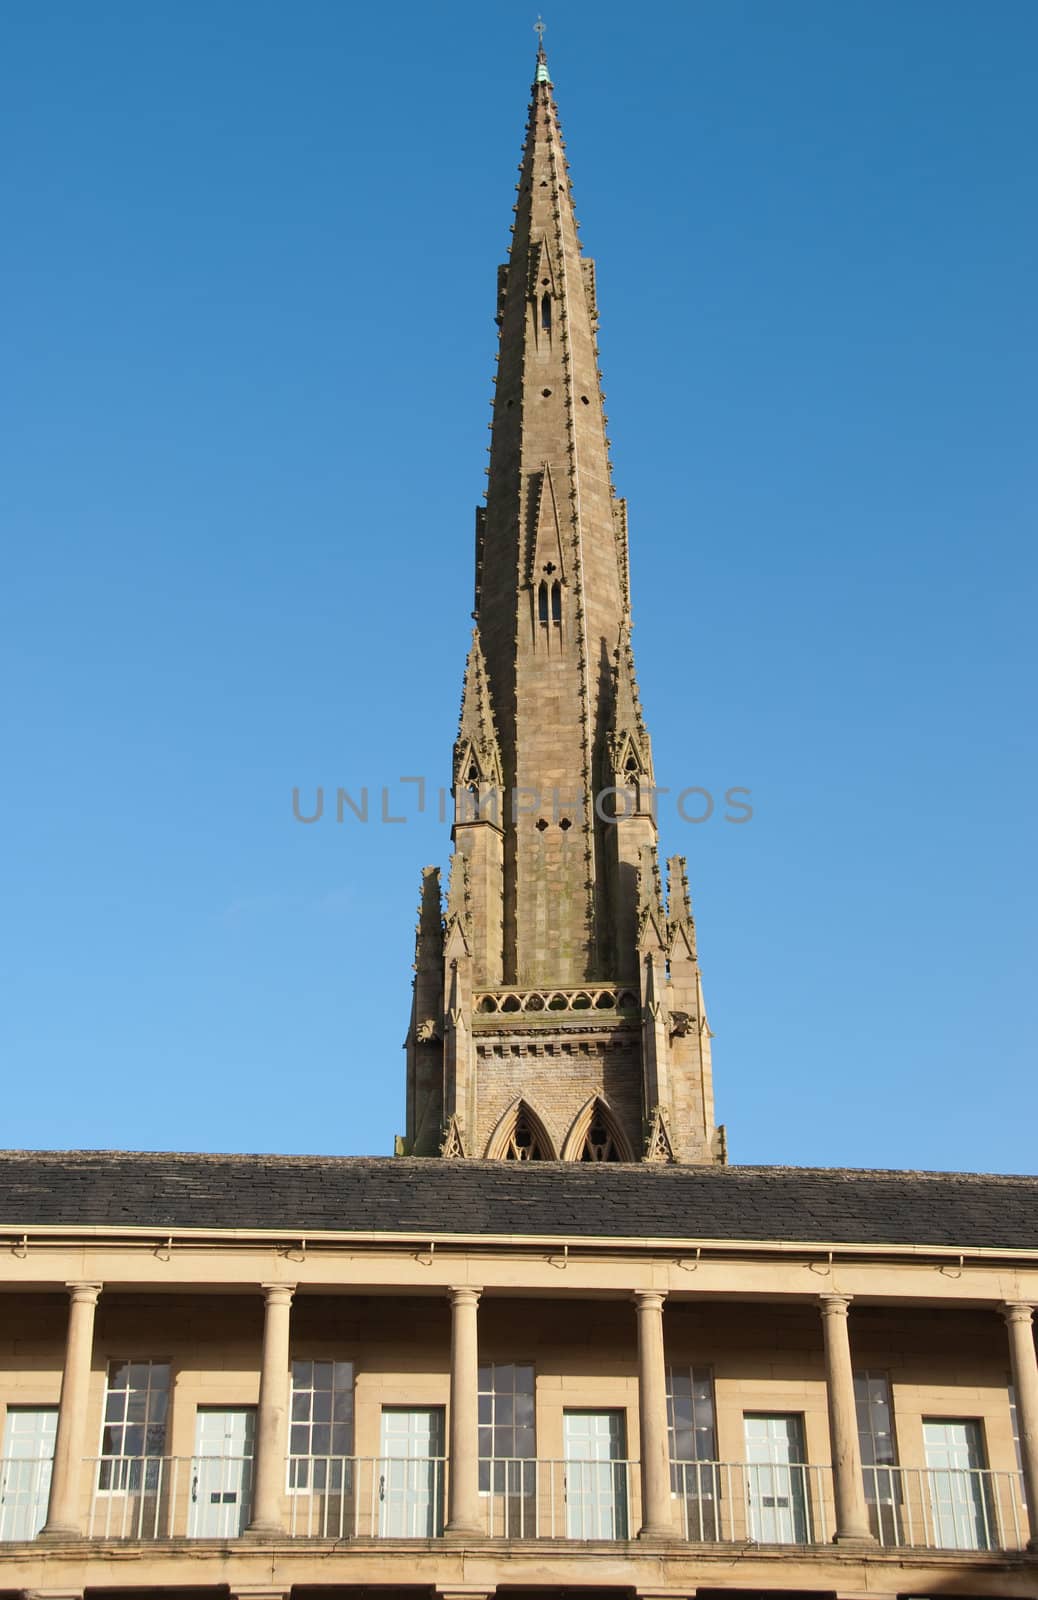 Square Church Tower from Piece Hall by d40xboy